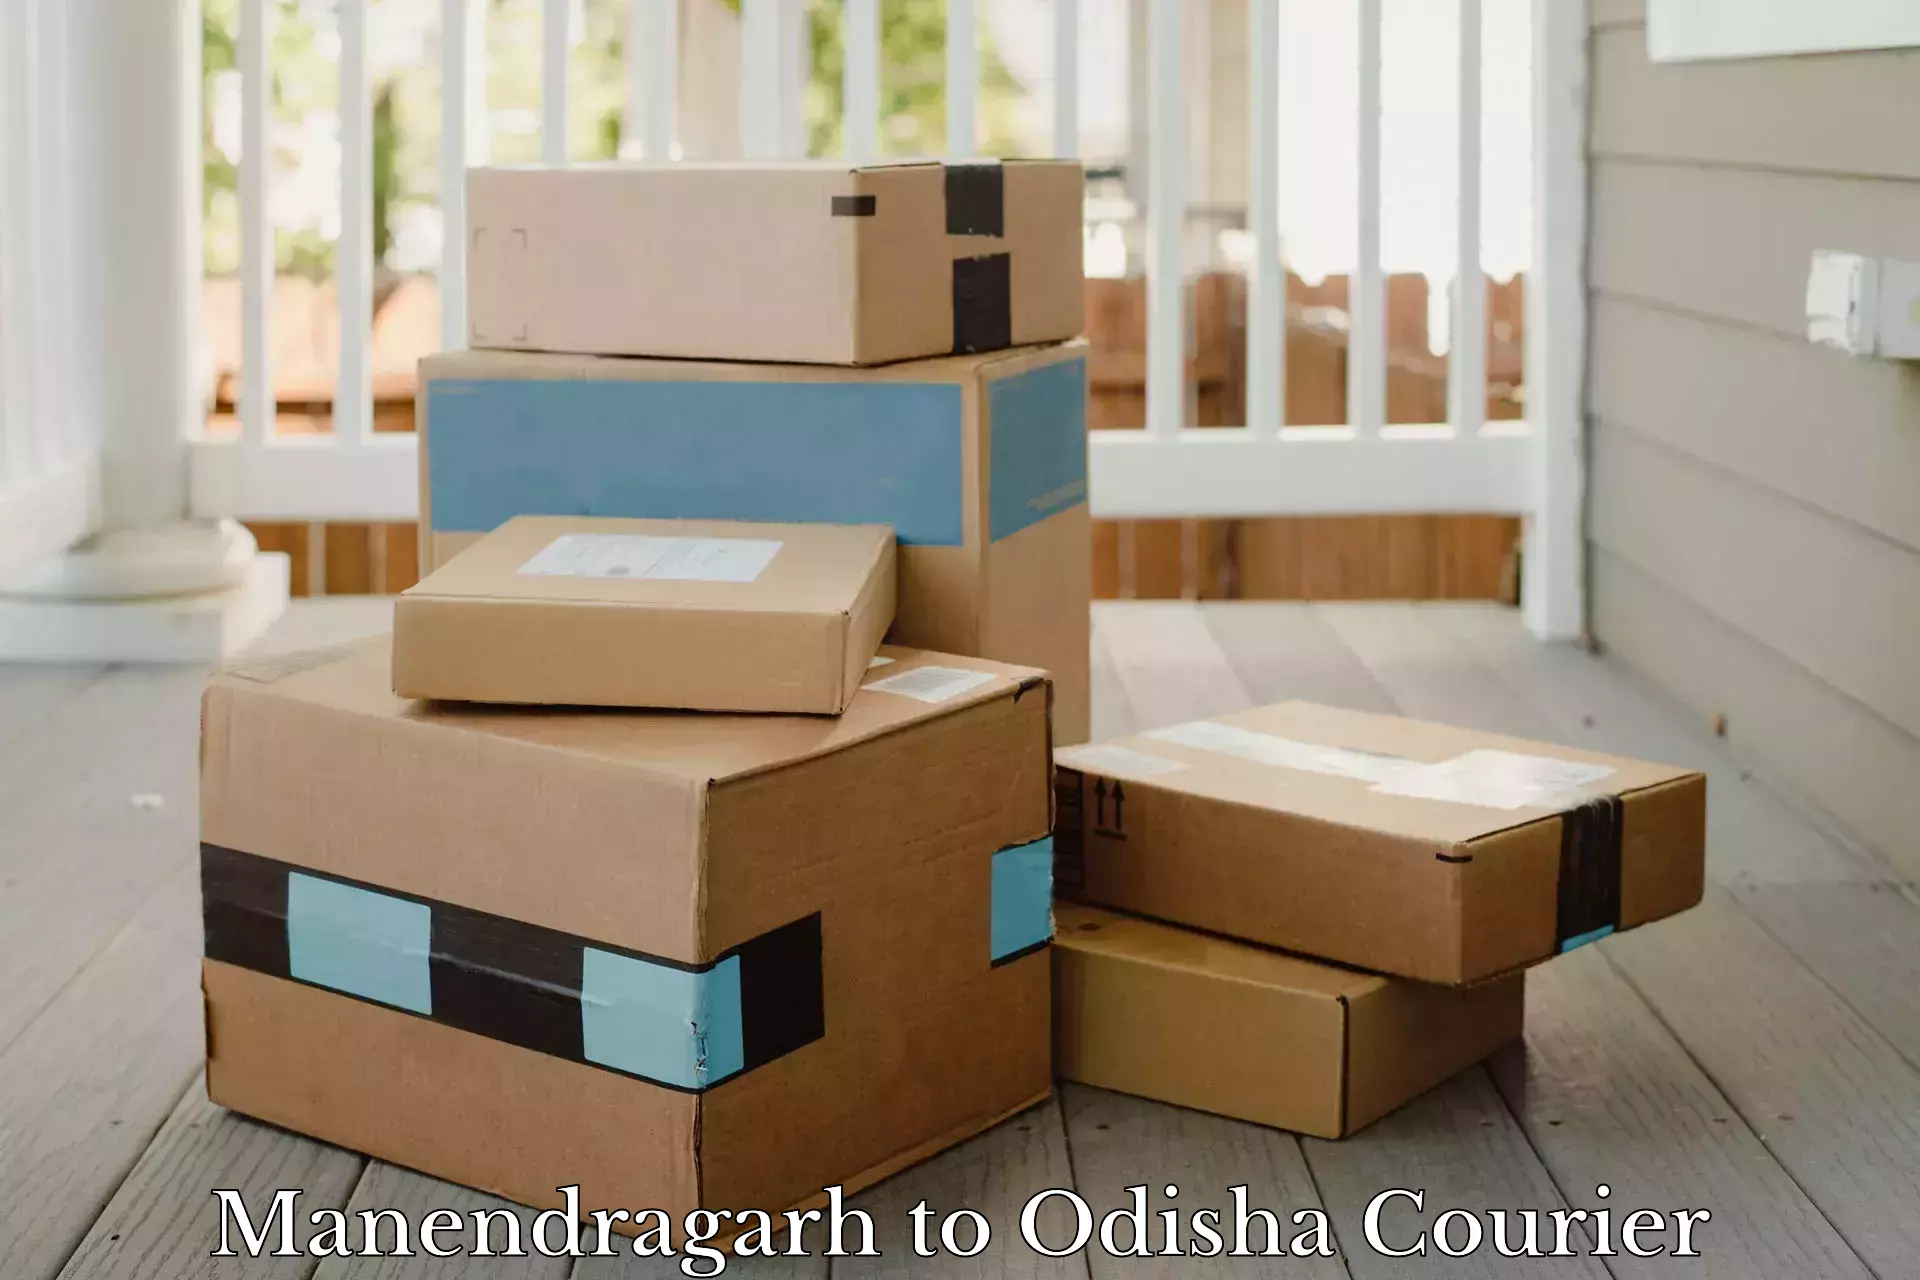 Parcel service for businesses in Manendragarh to Nabarangpur